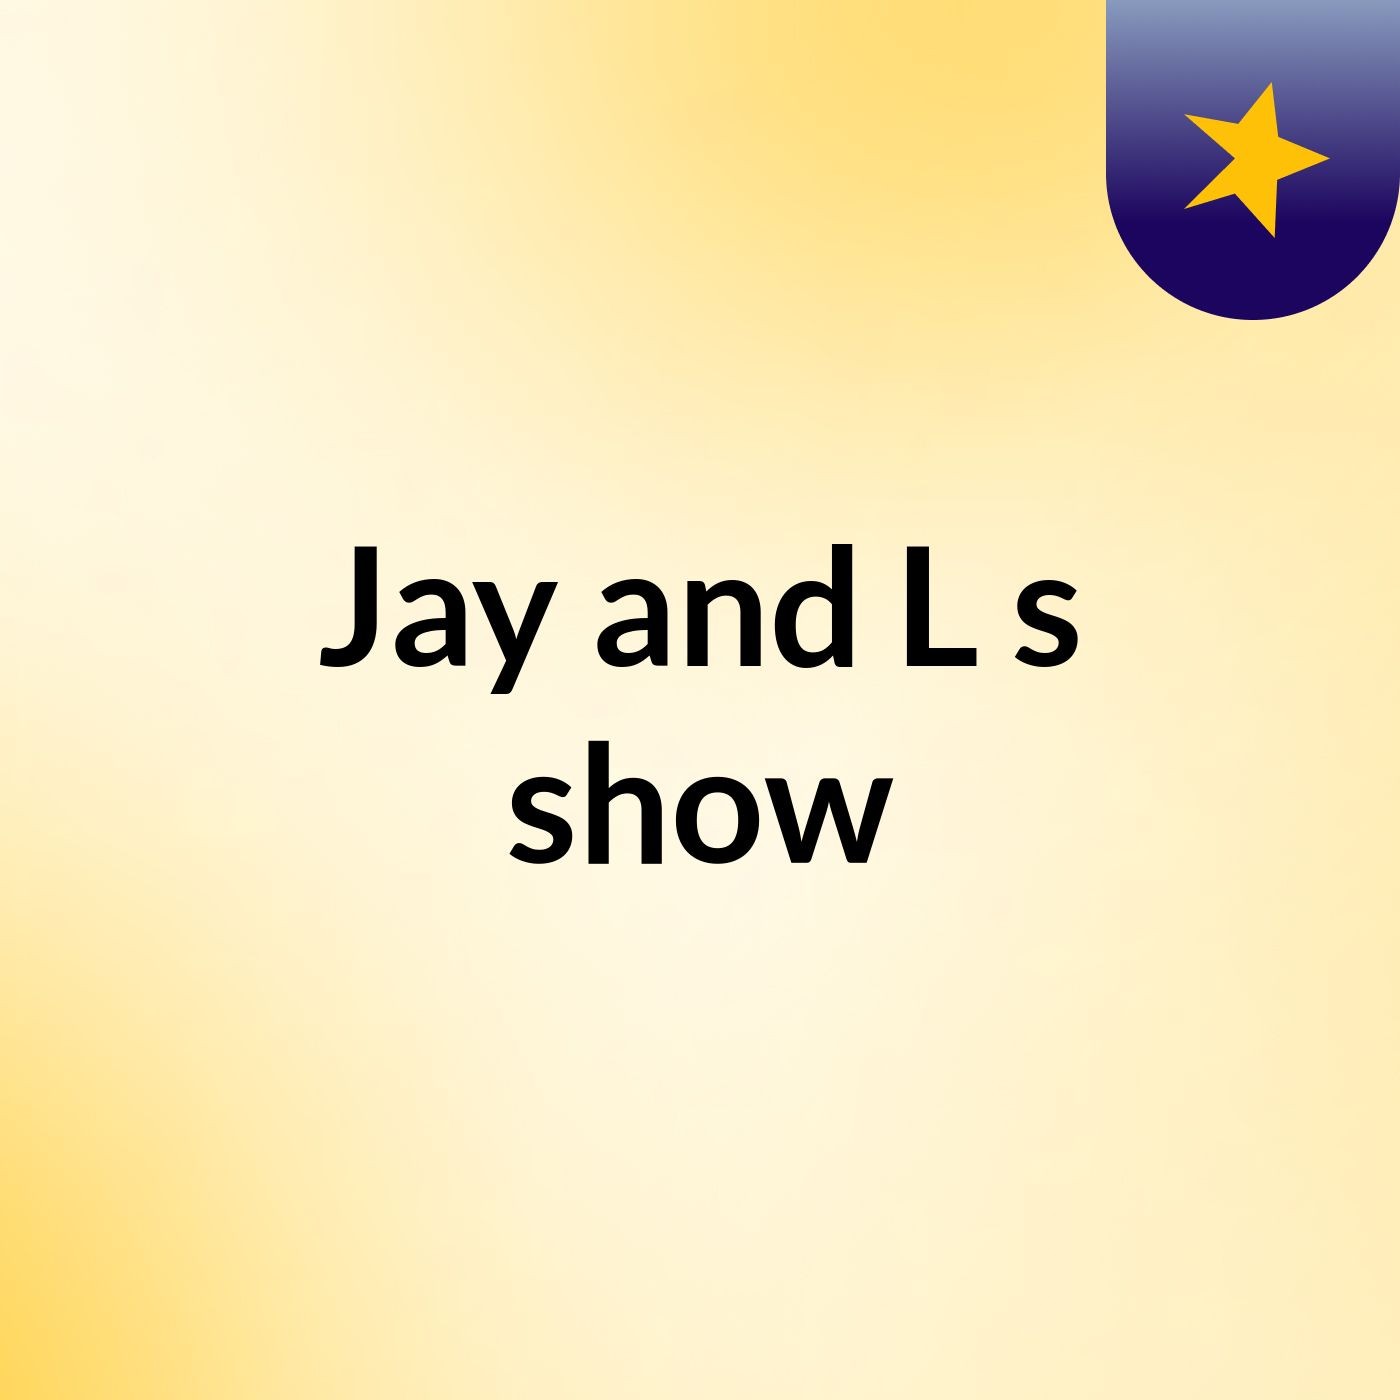 Jay and L's show